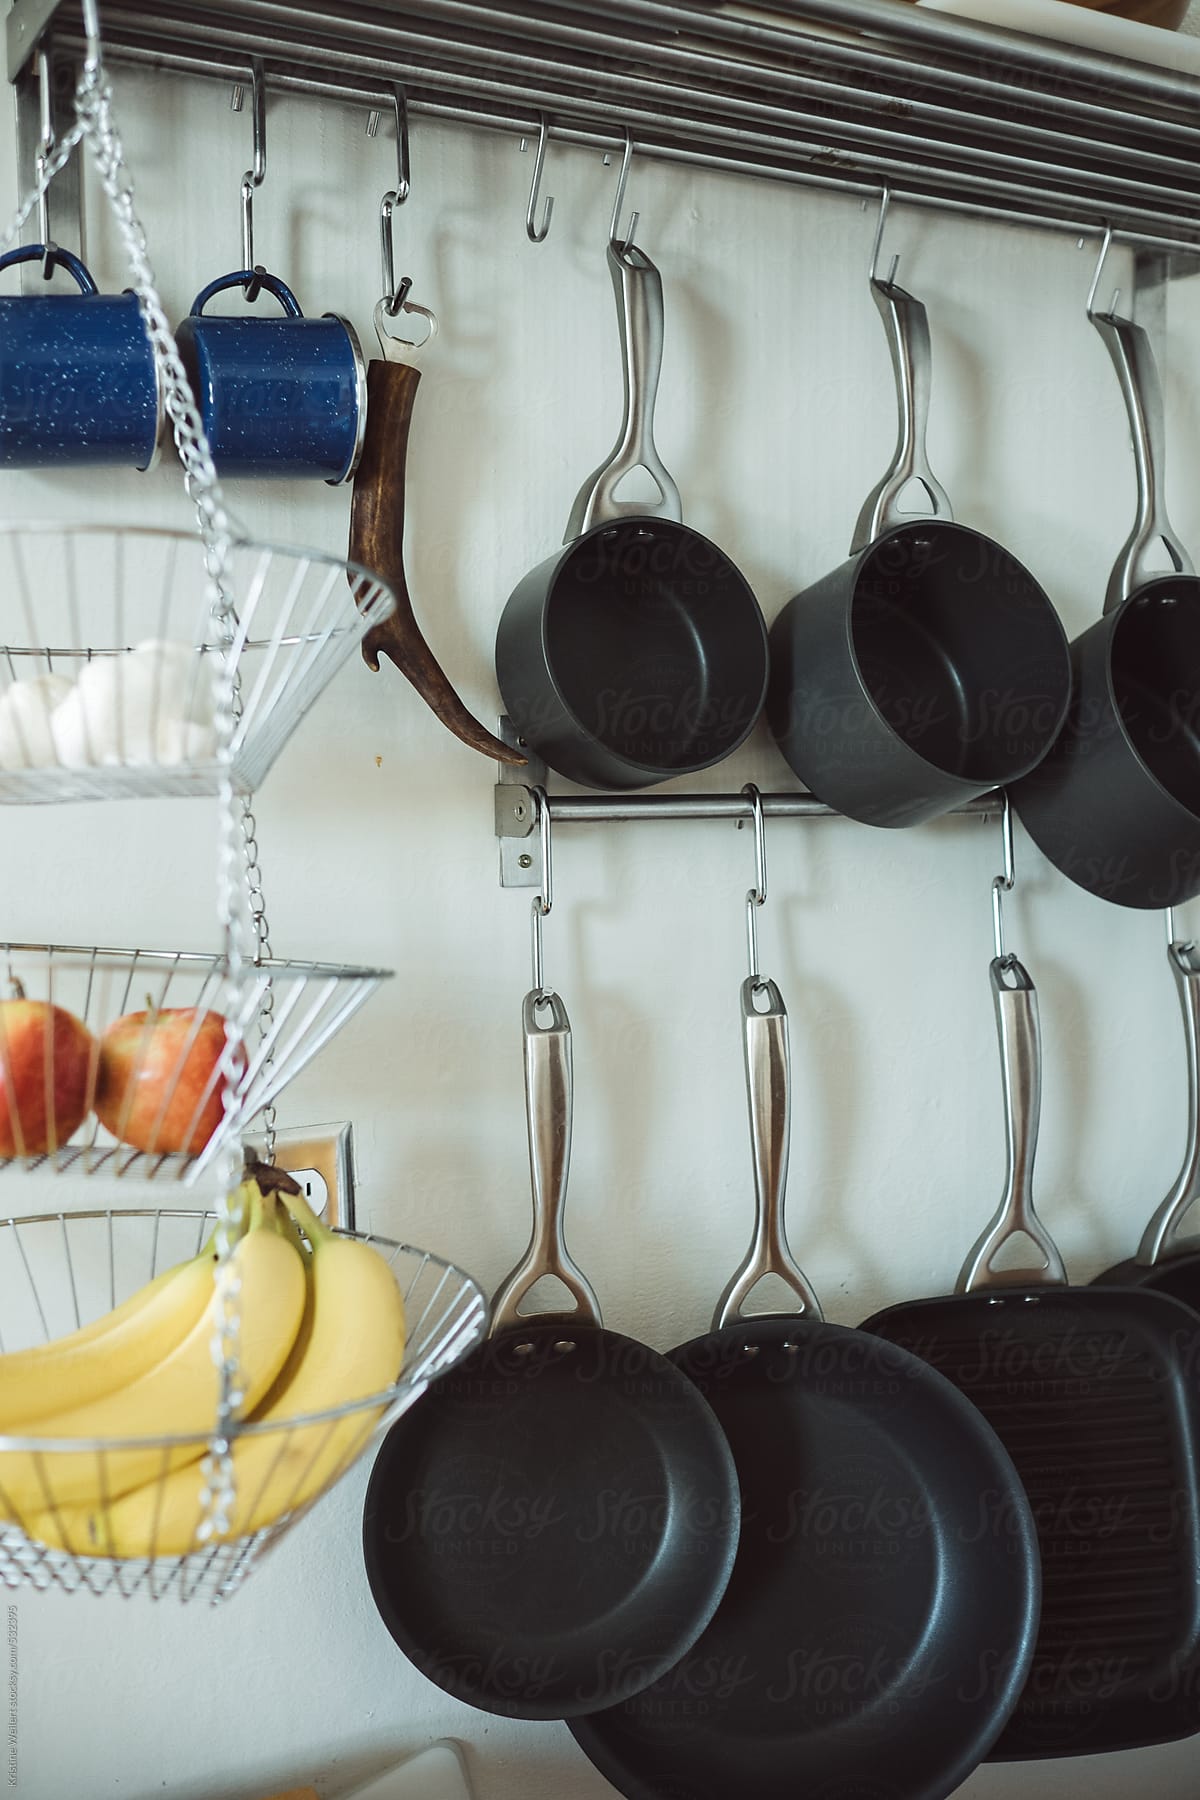 Kitchen pots and pans and other utensils organized and hanging on a wall